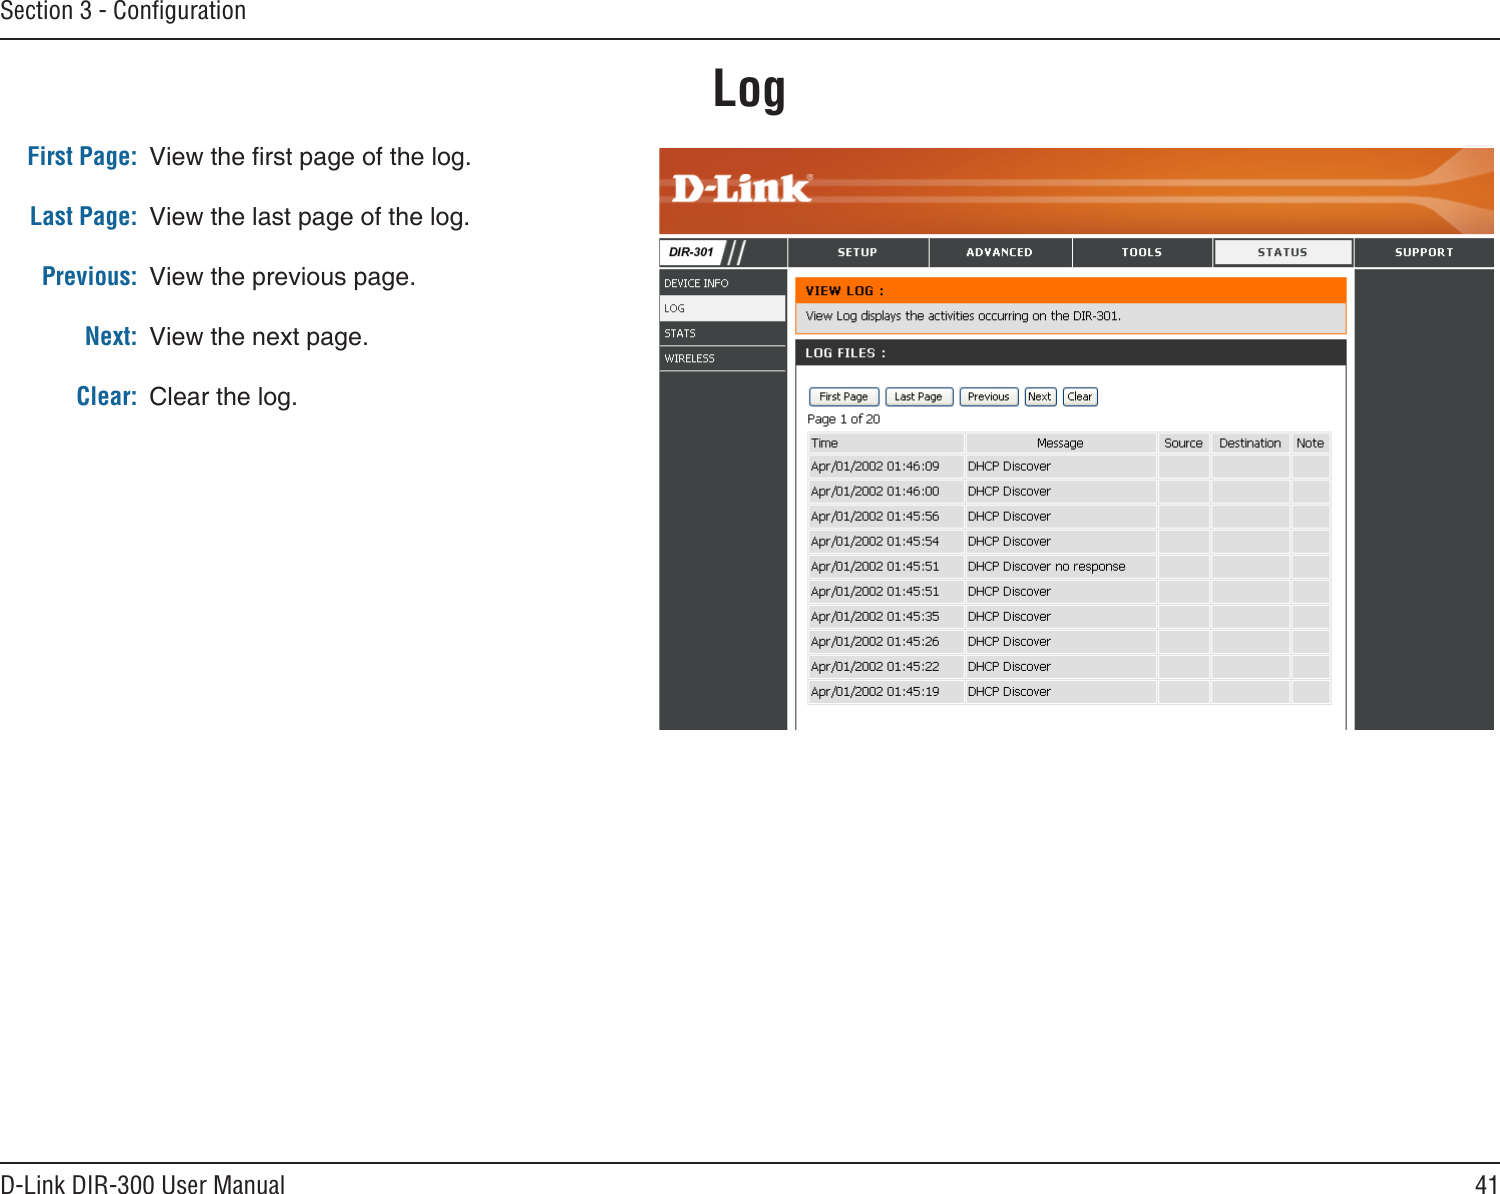 41D-Link DIR-300 User ManualSection 3 - ConﬁgurationLogFirst Page:Last Page:Previous:Next:Clear:View the rst page of the log.View the last page of the log.View the previous page.View the next page.Clear the log.